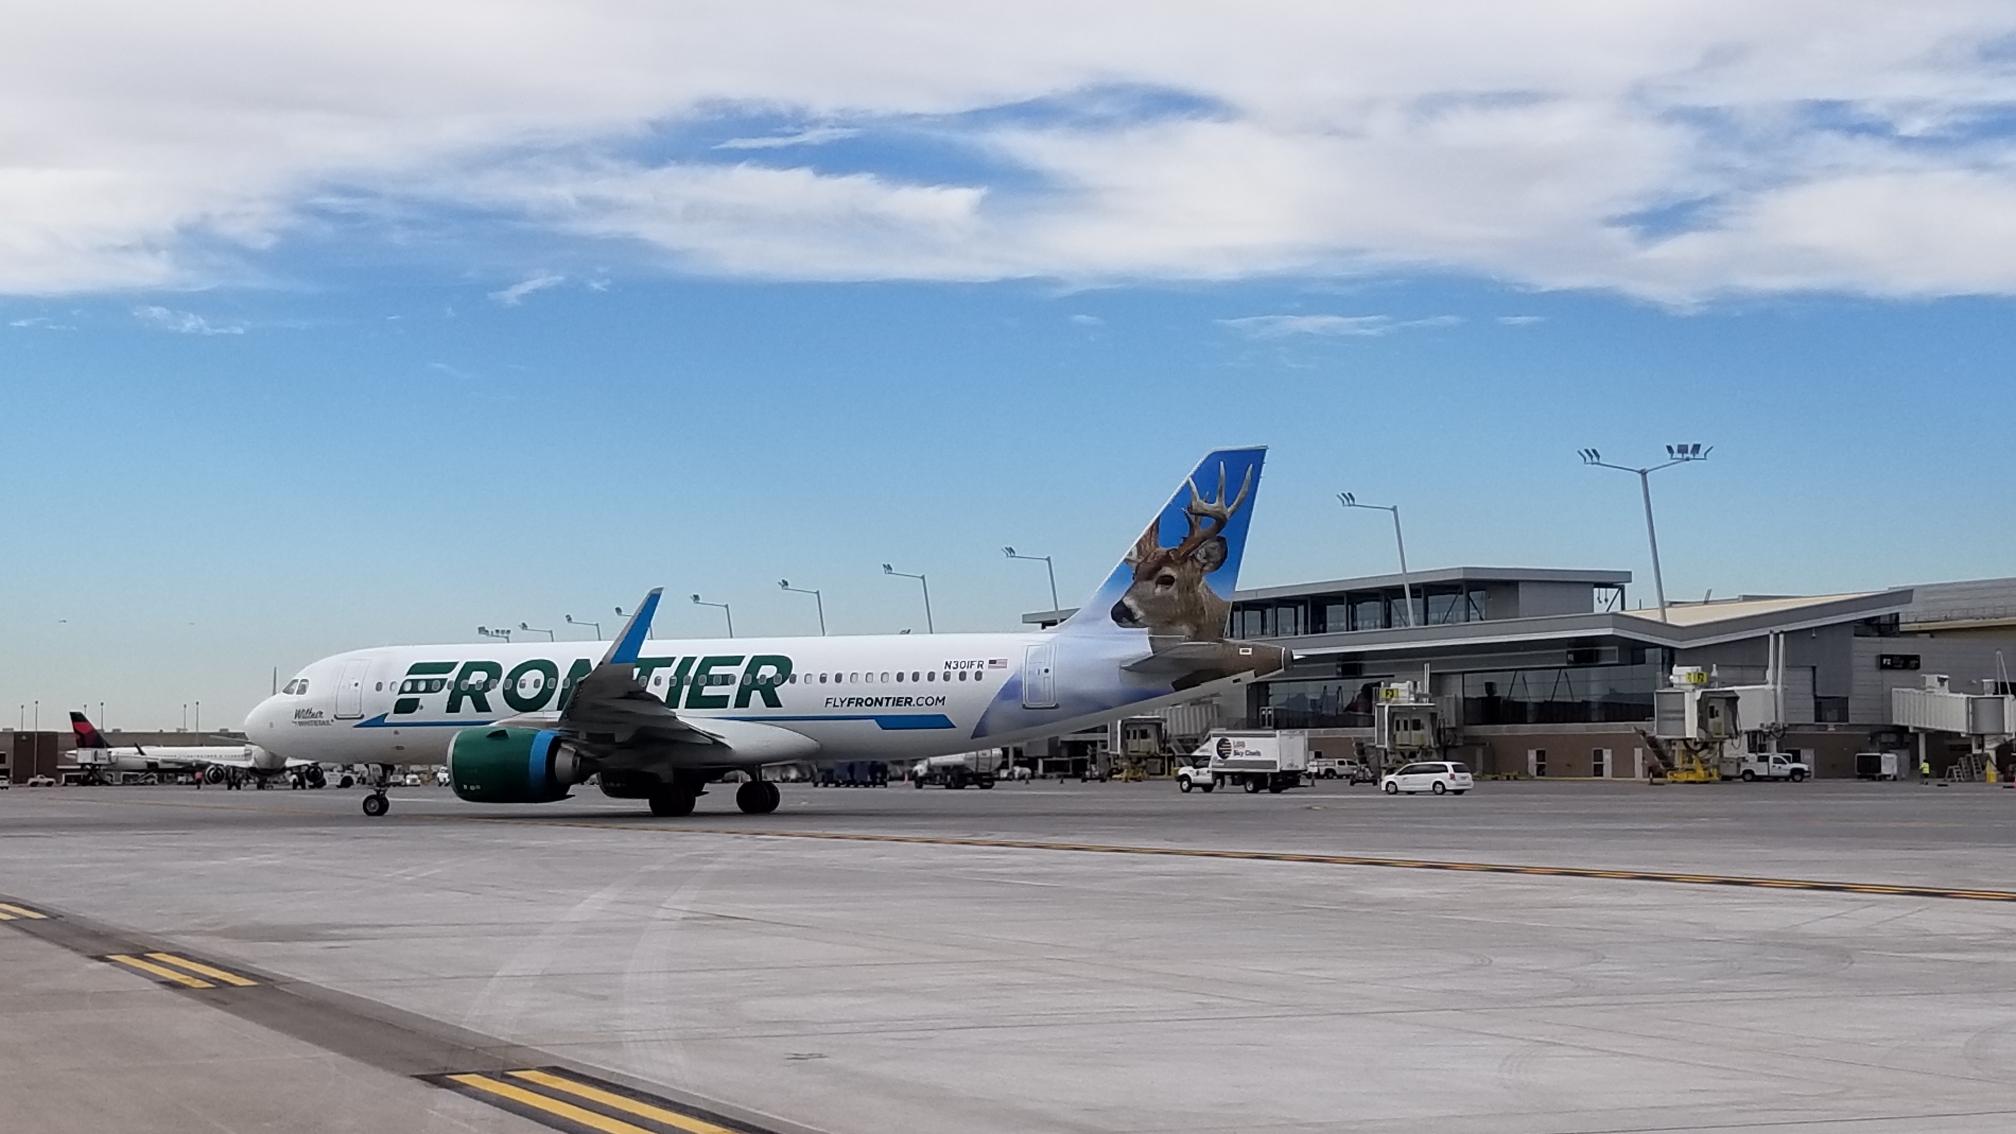 Phoenix network boosted by 10 additional routes with Frontier Airlines